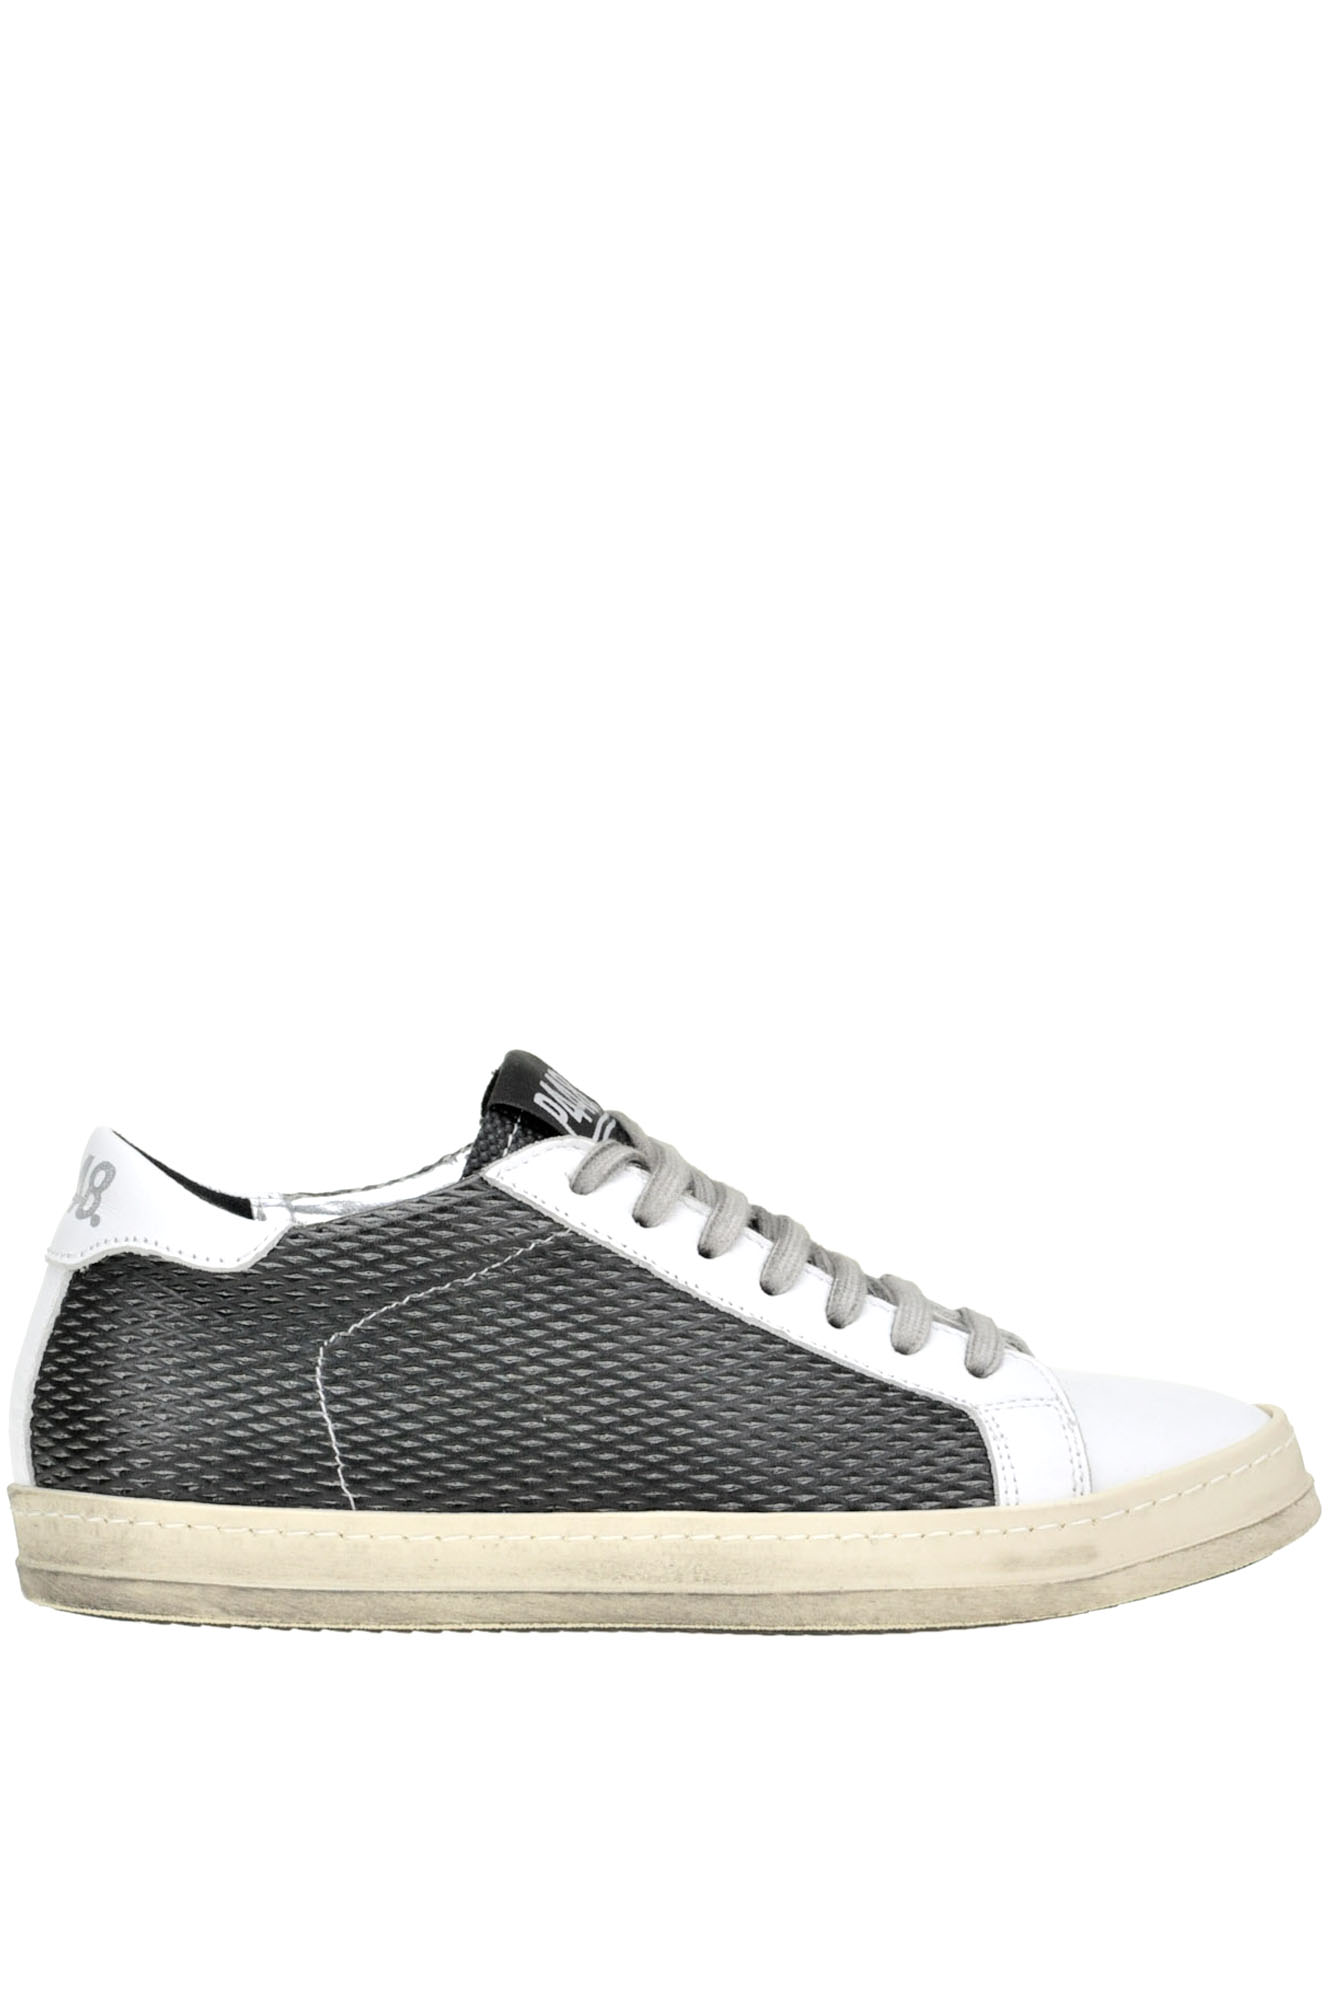 P448 LEATHER SNEAKERS